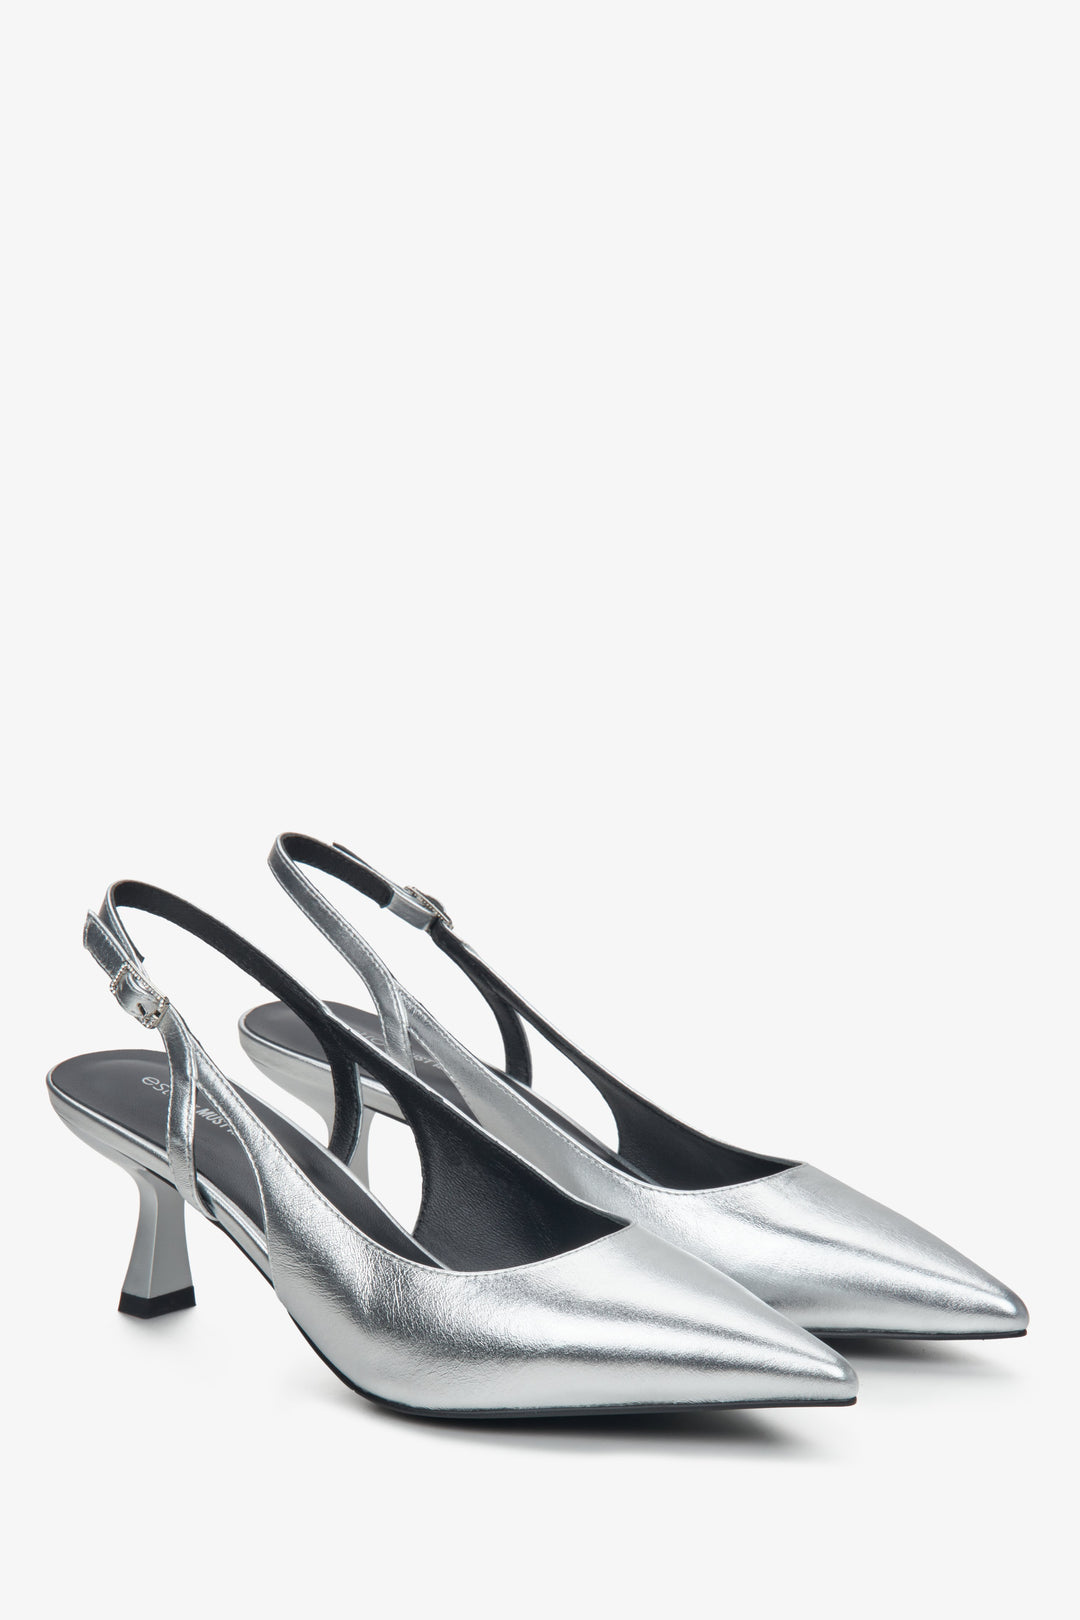 Women's silver slingback pumps made of genuine leather by Estro x MustHave.